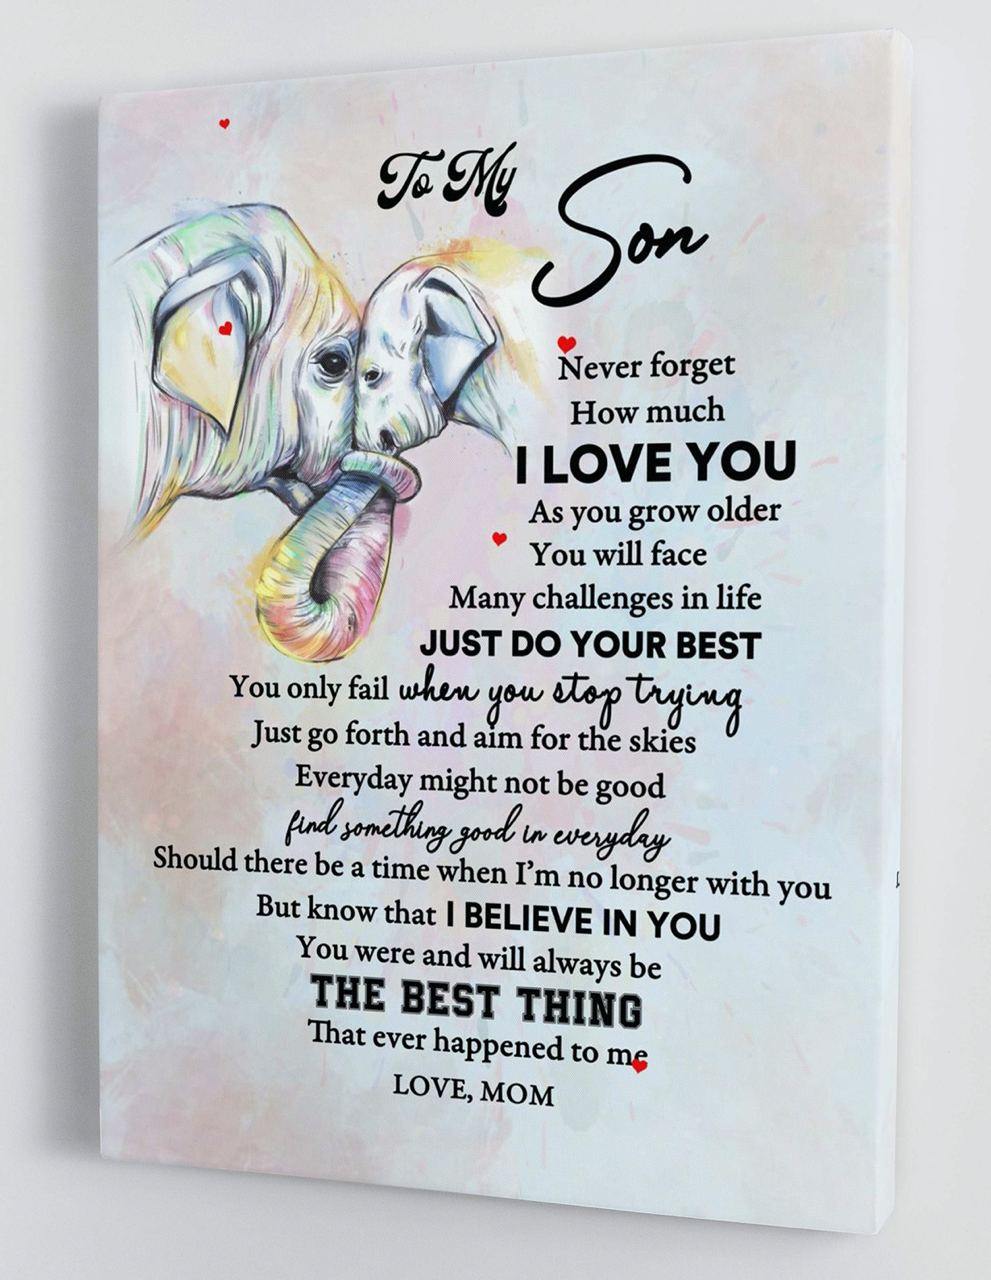 To My Son - From Mom - Framed Canvas Gift MS036 - DivesArt LLC